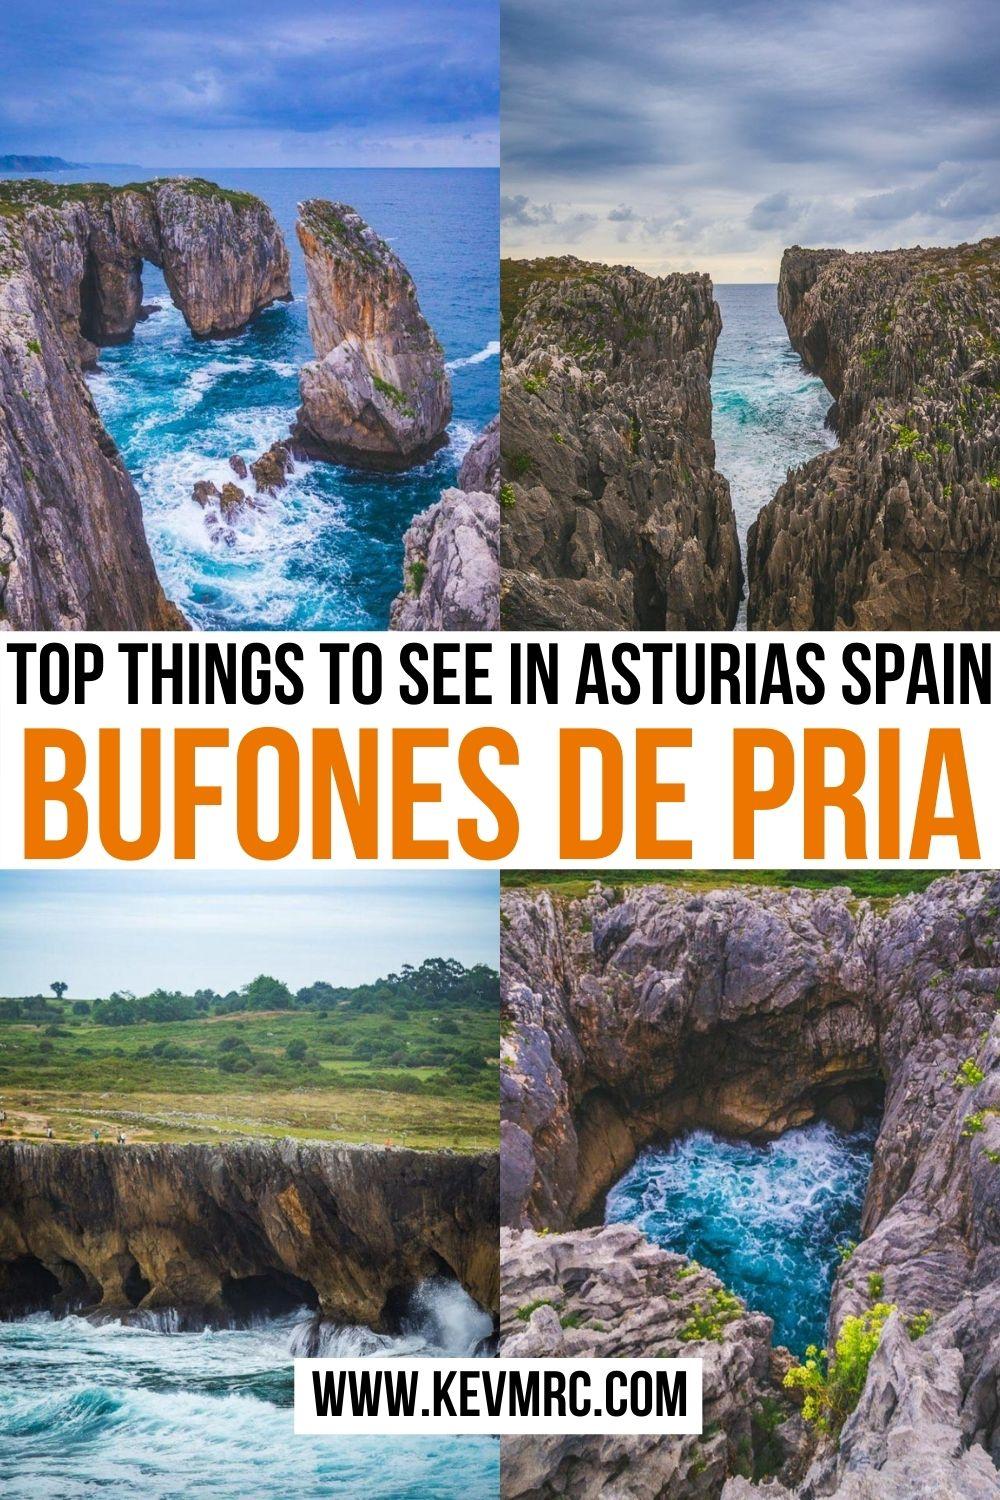 The Bufones de Pria are massive geysers on the coast of Asturias Spain, and definitely a must-see if you’re around. Seeing jets of seawater rise high up in the air right next to you is an incredible experience, and can get pretty impressive in the right conditions. asturias spain travel | asturias spain travel | que ver en asturias | best places in spain